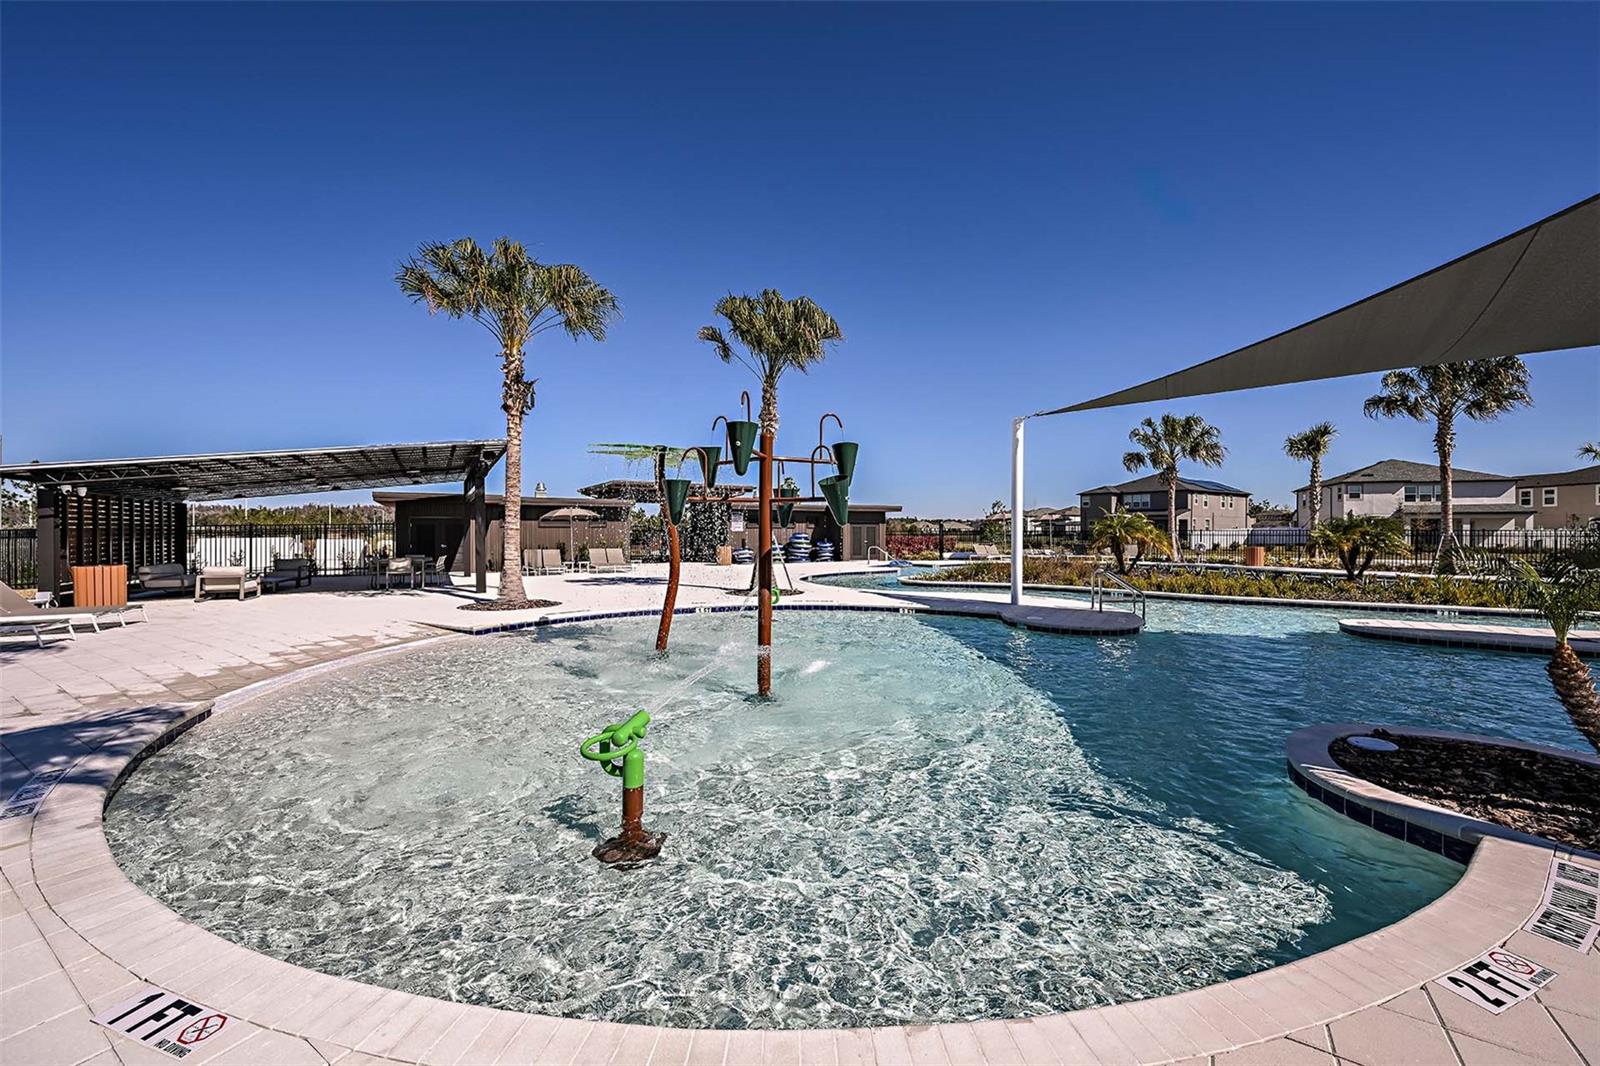 Tot Area of Pool at Master Planned Community Amenites Center